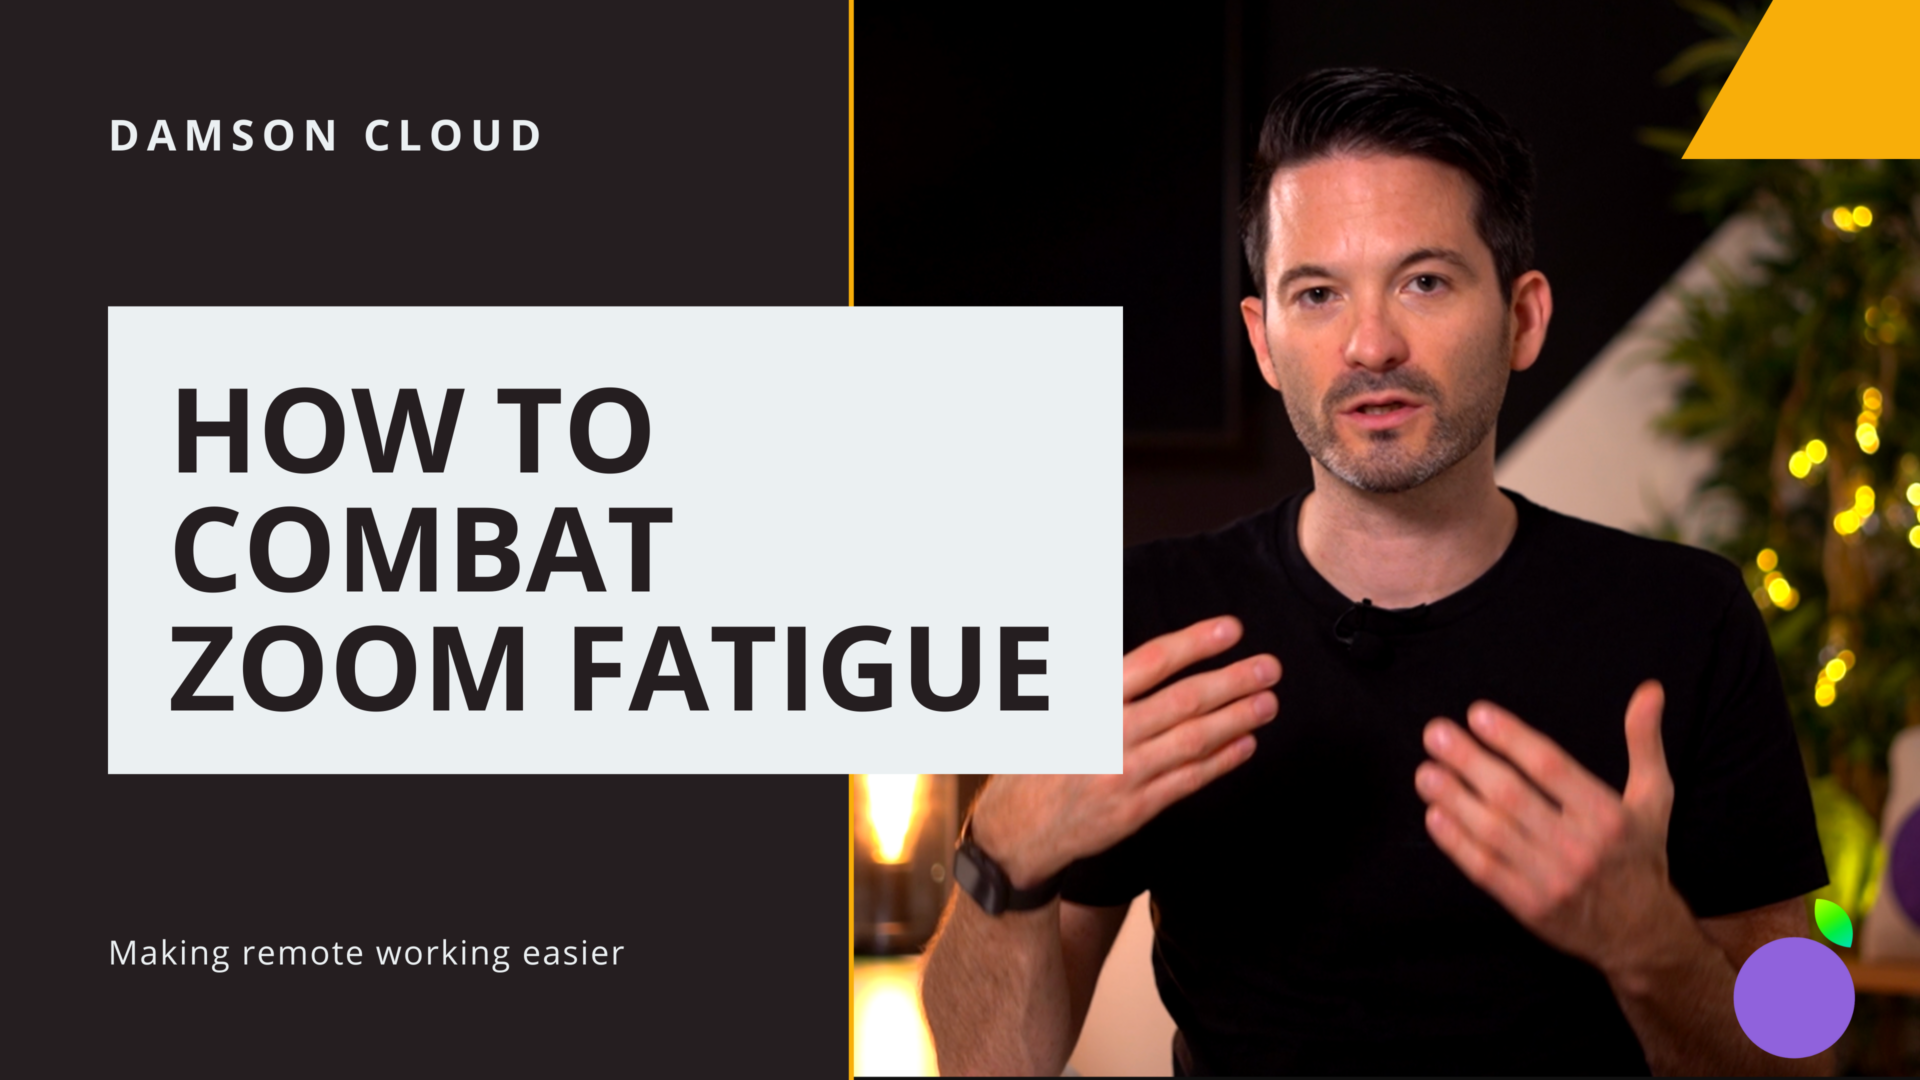 7 Steps to Combat Zoom Fatigue